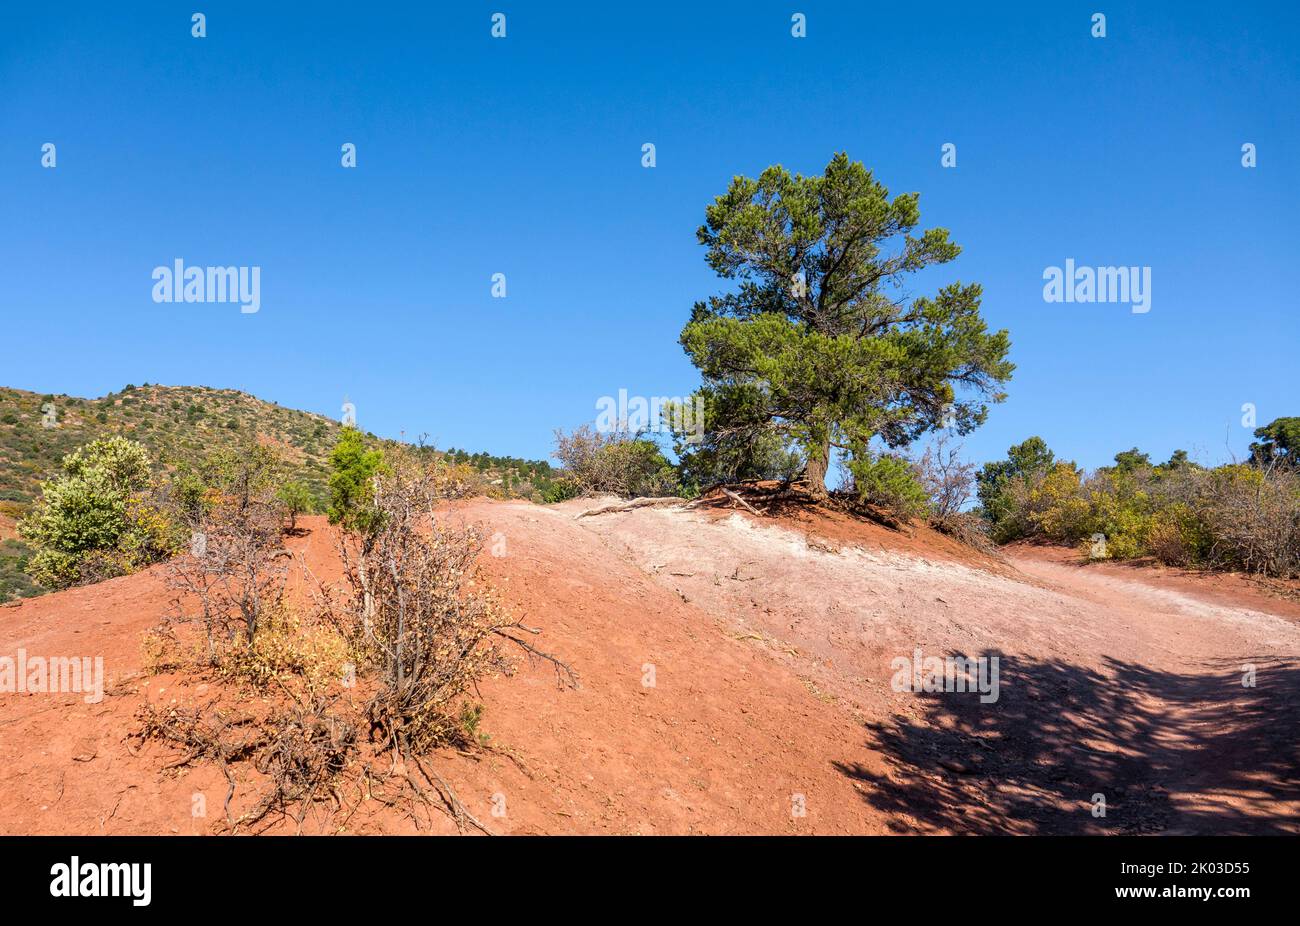 Zion National Park is located in southwestern Utah on the border with Arizona. It has an area of 579 kö² and lies between 1128 m and 2660 m altitude. Pine tree at La Verkin Creek Trail. Stock Photo